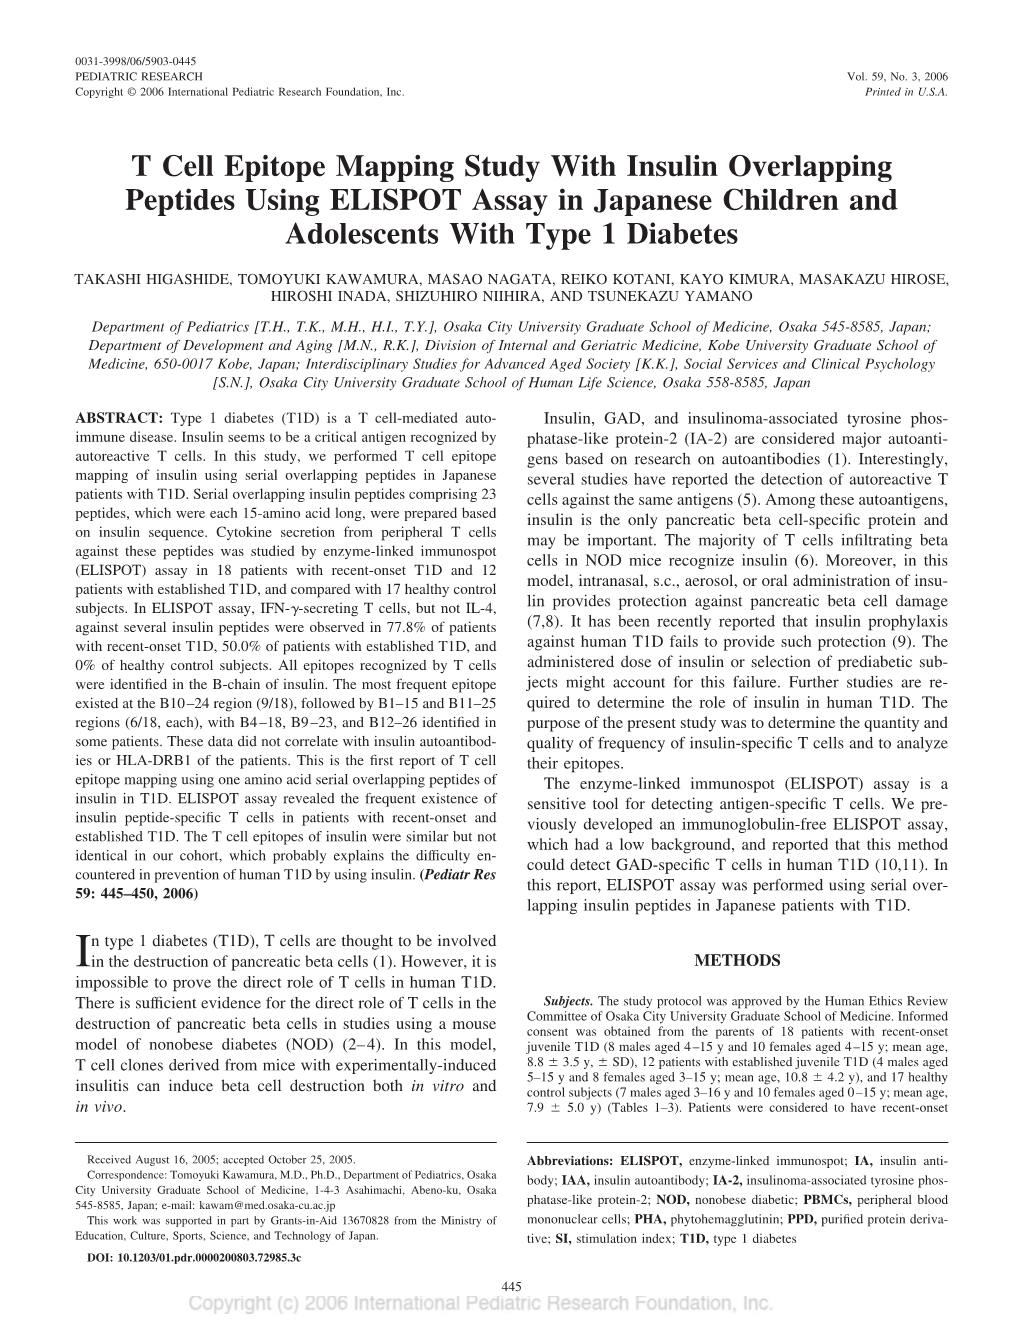 T Cell Epitope Mapping Study with Insulin Overlapping Peptides Using ELISPOT Assay in Japanese Children and Adolescents with Type 1 Diabetes